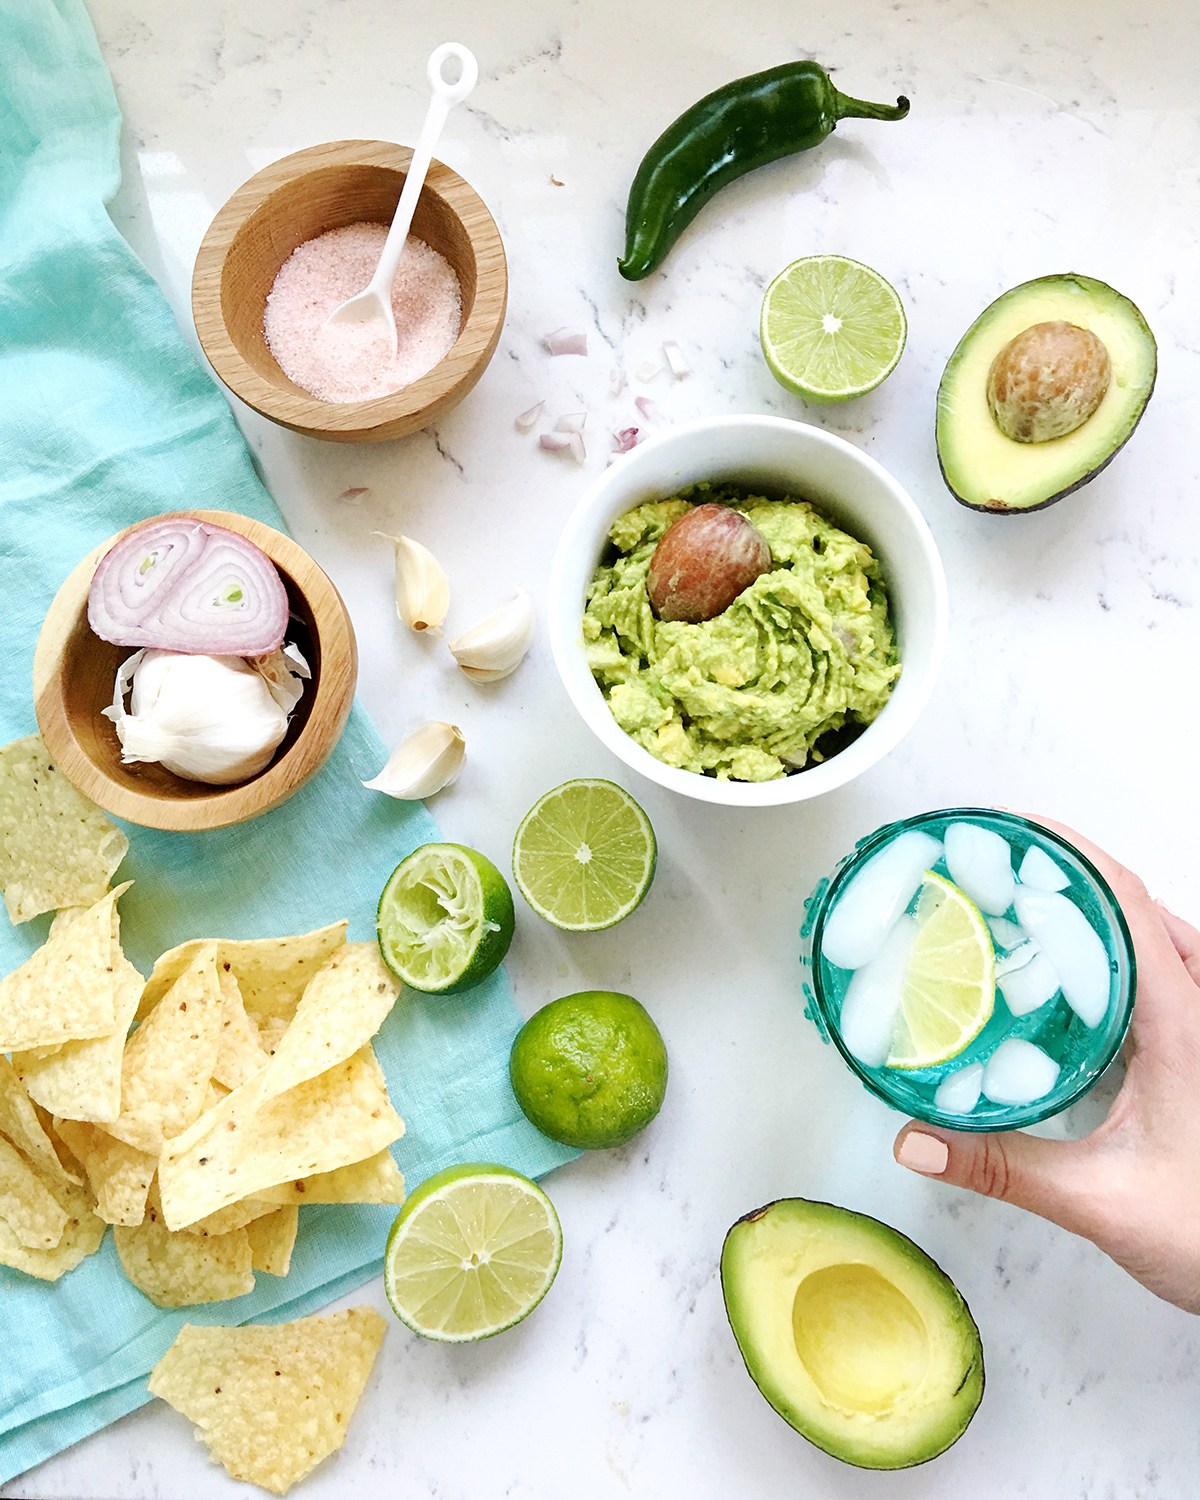 ​5 Tips for Making Guacamole Healthier